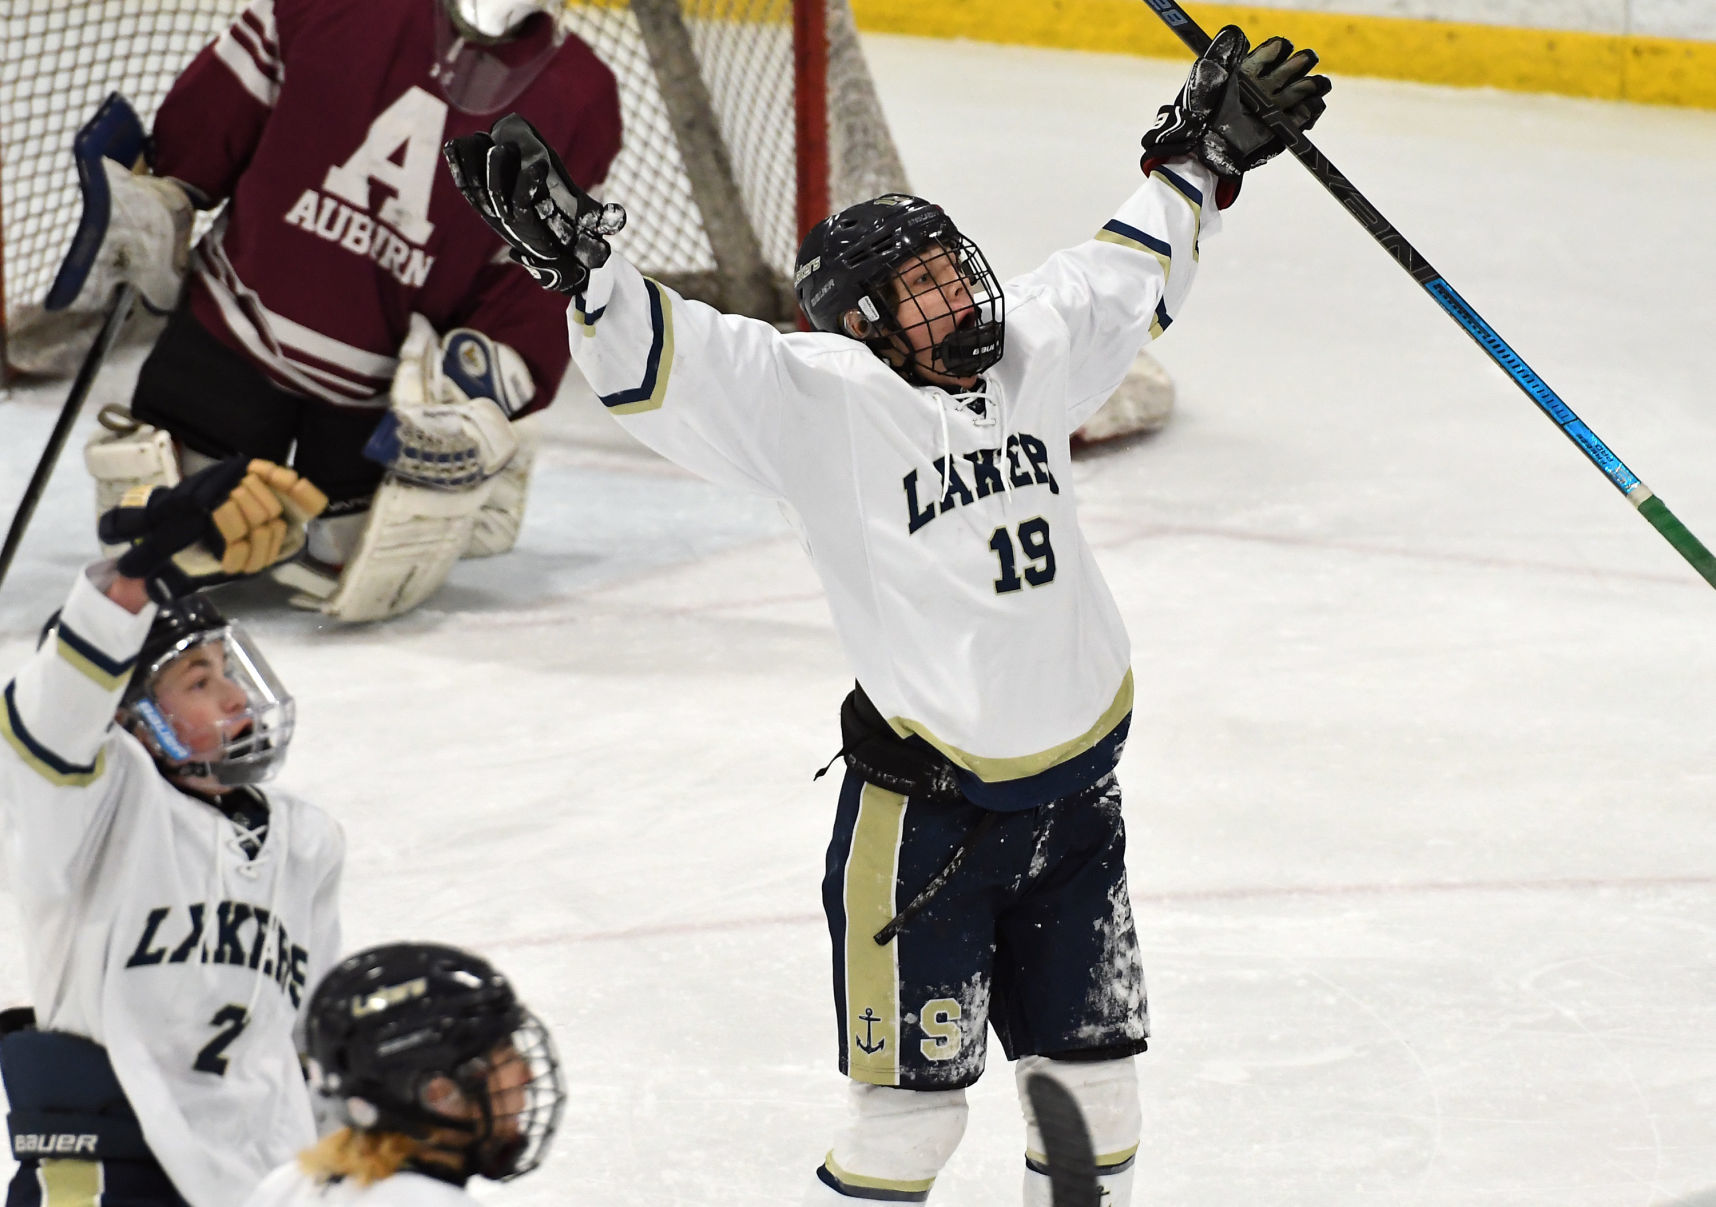 Live blog Skaneateles boys hockey plays Grand Island for spot in state final four